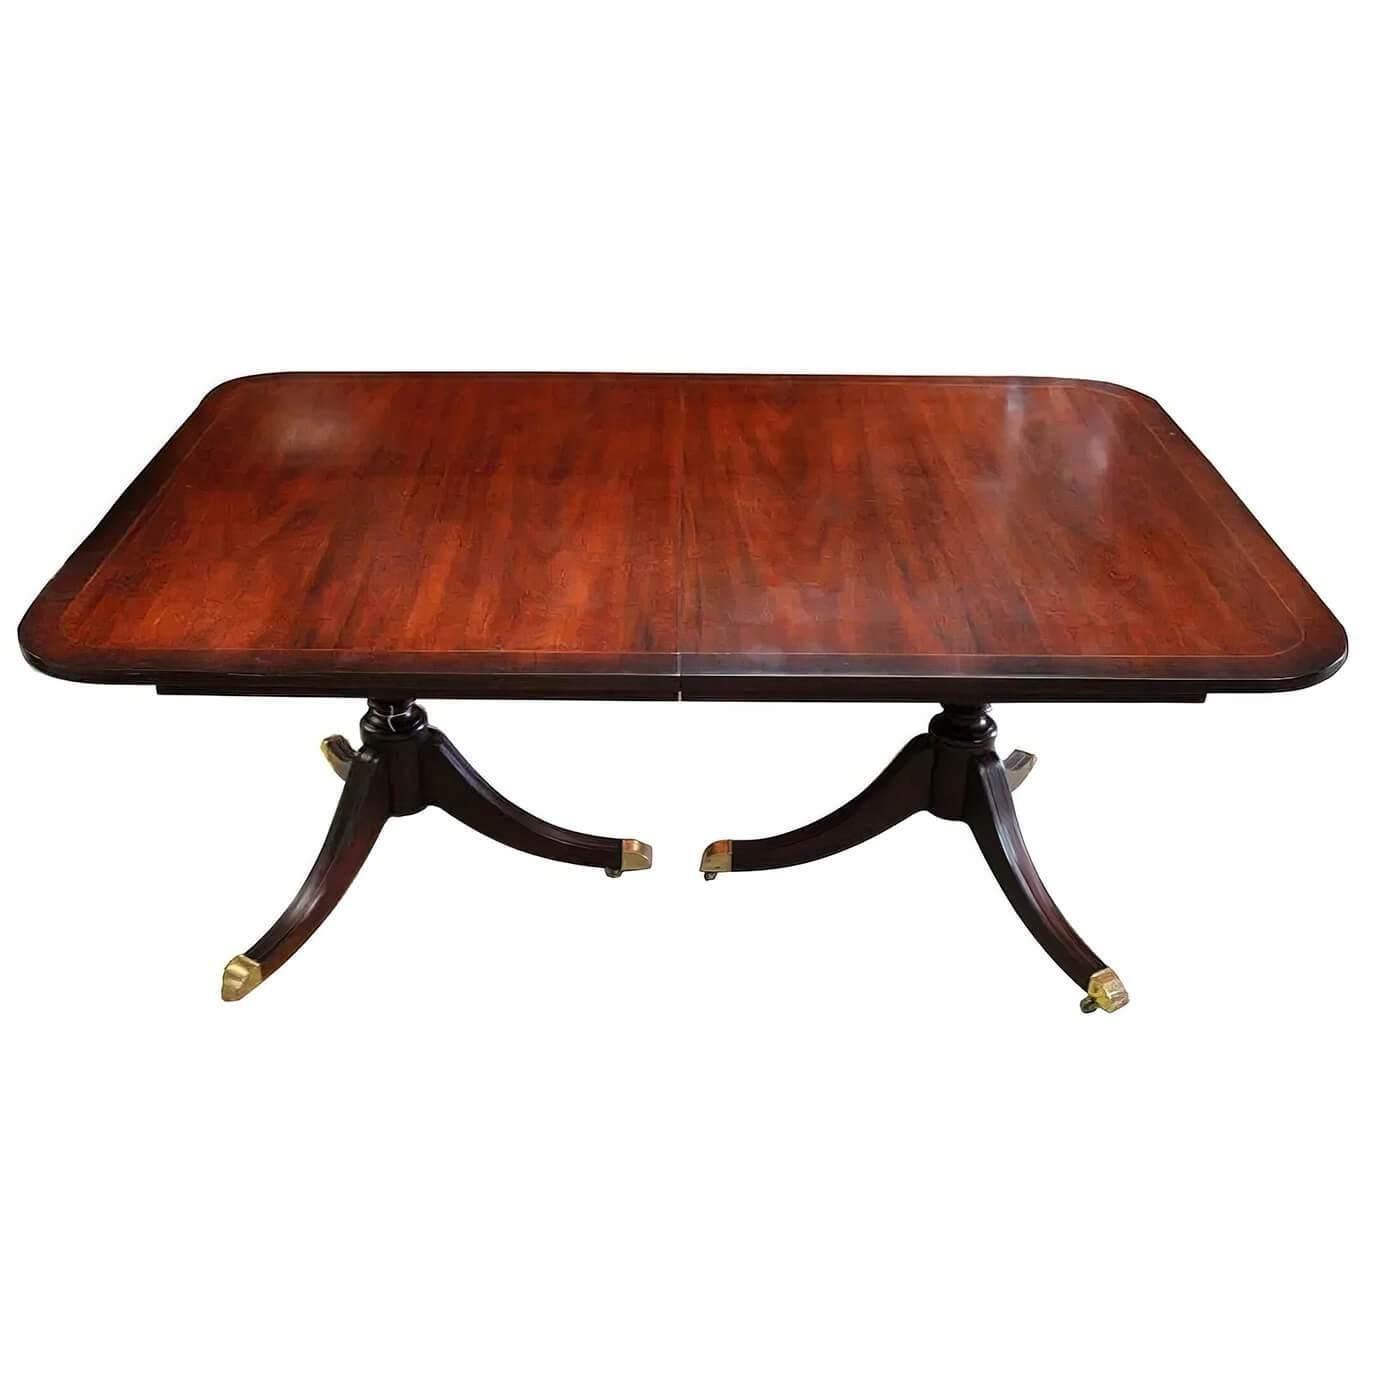 North American Regency Style Double Pedestal Dining Table